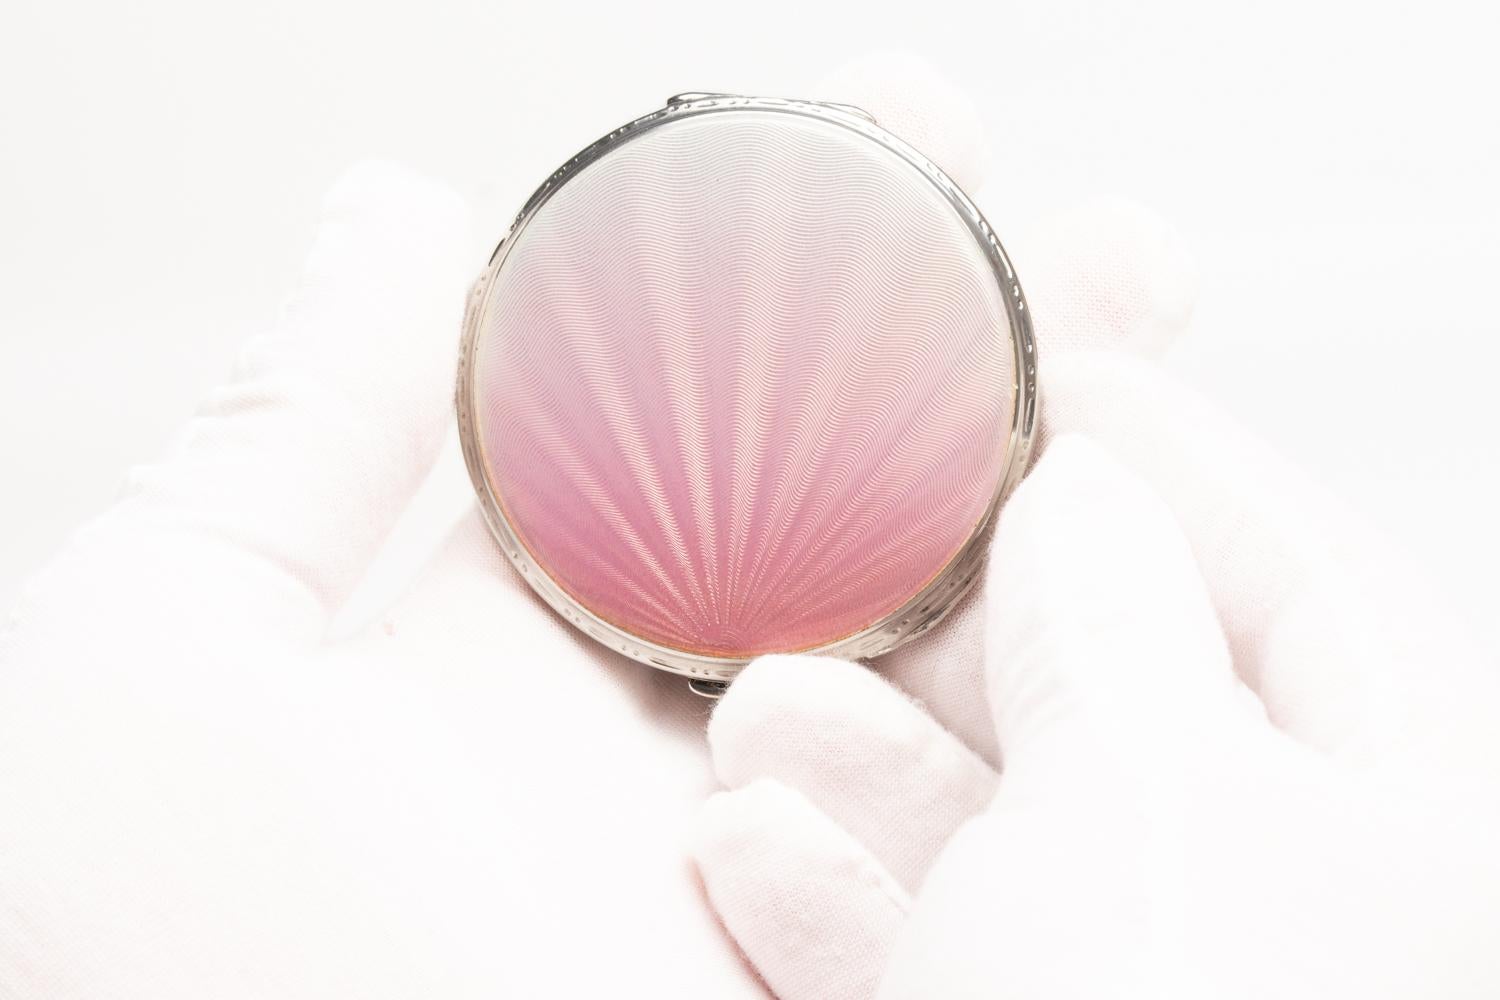 This rare and gorgeous Art Deco Solid Silver & Pink Guilloche Enamel Round Powder Compact was made by Crisford & Norris in Birmingham 1938. This exquisite piece is decorated with two guilloche enamel colours: pale pink and pearl white with a